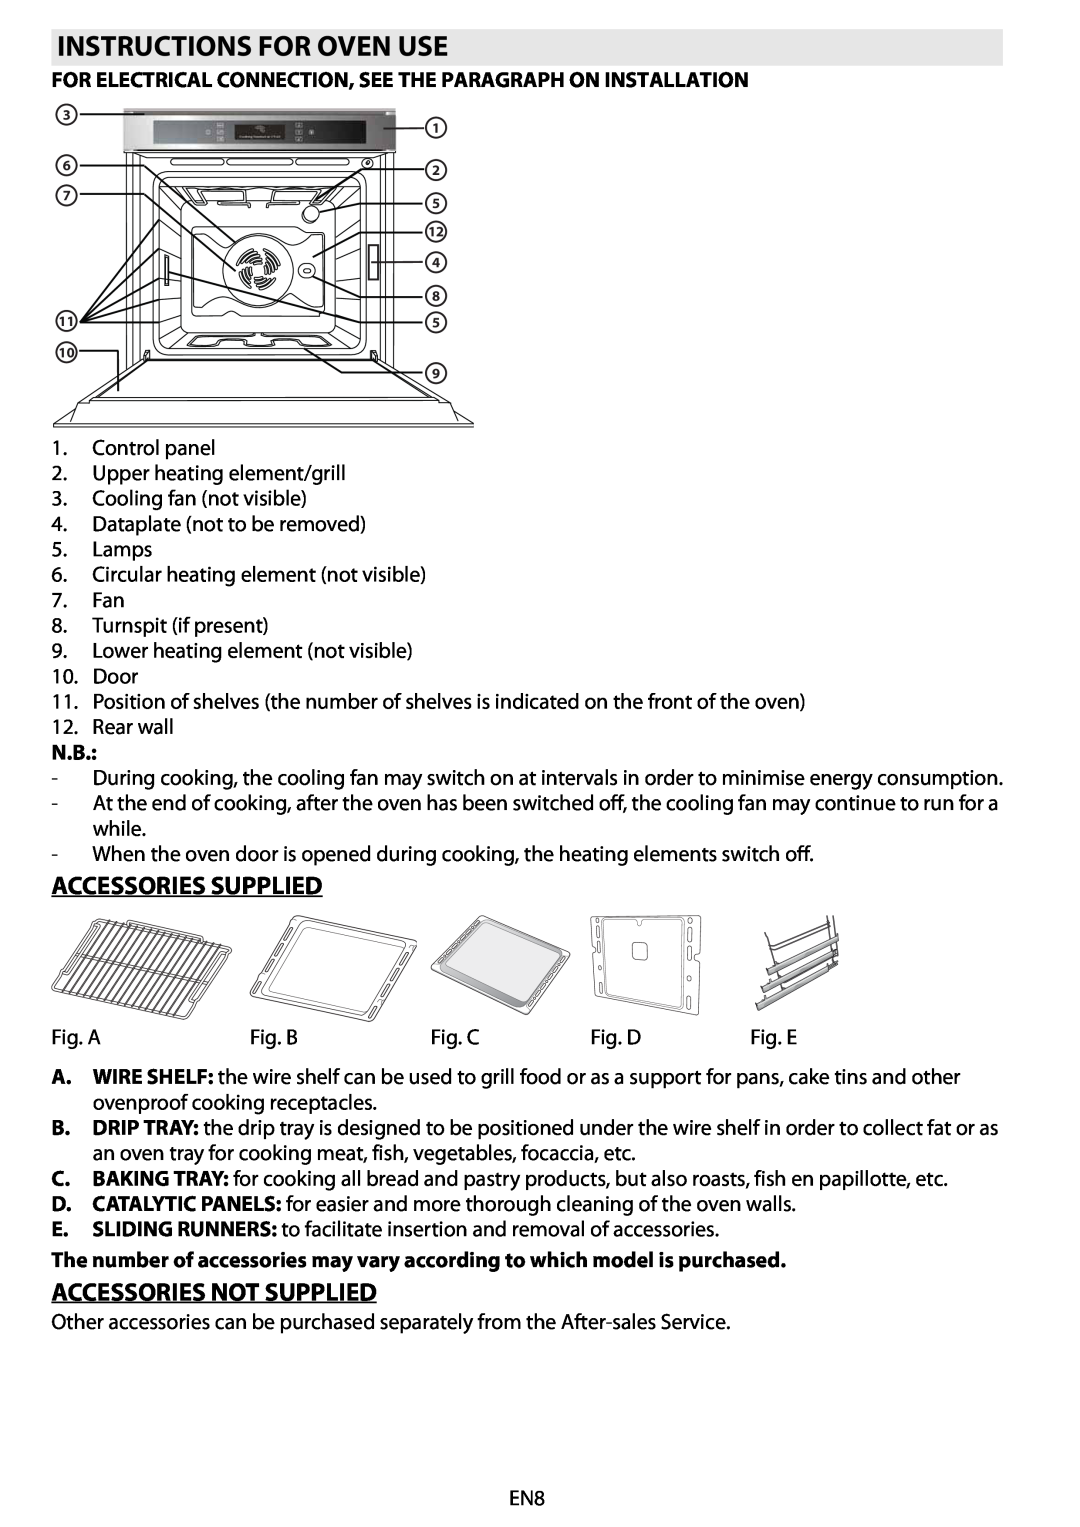 Whirlpool AKZM 6560 manual Instructions For Oven Use, Accessories Supplied, Accessories Not Supplied 